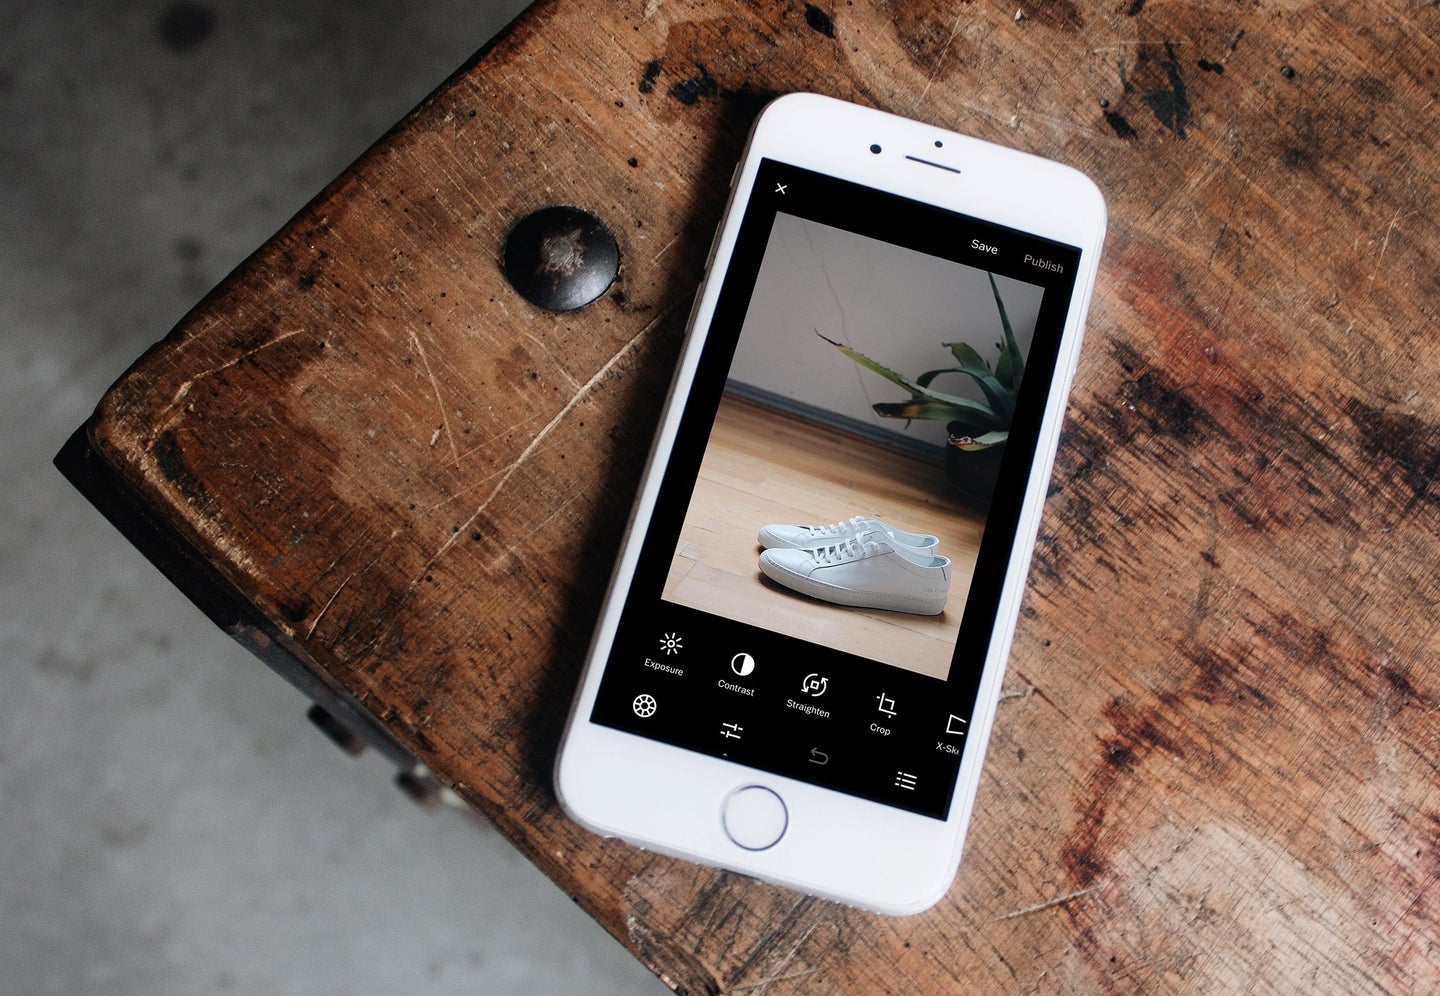 An iPhone on a wooden table, with the Photos app open to an image of shoes that someone is about to edit.